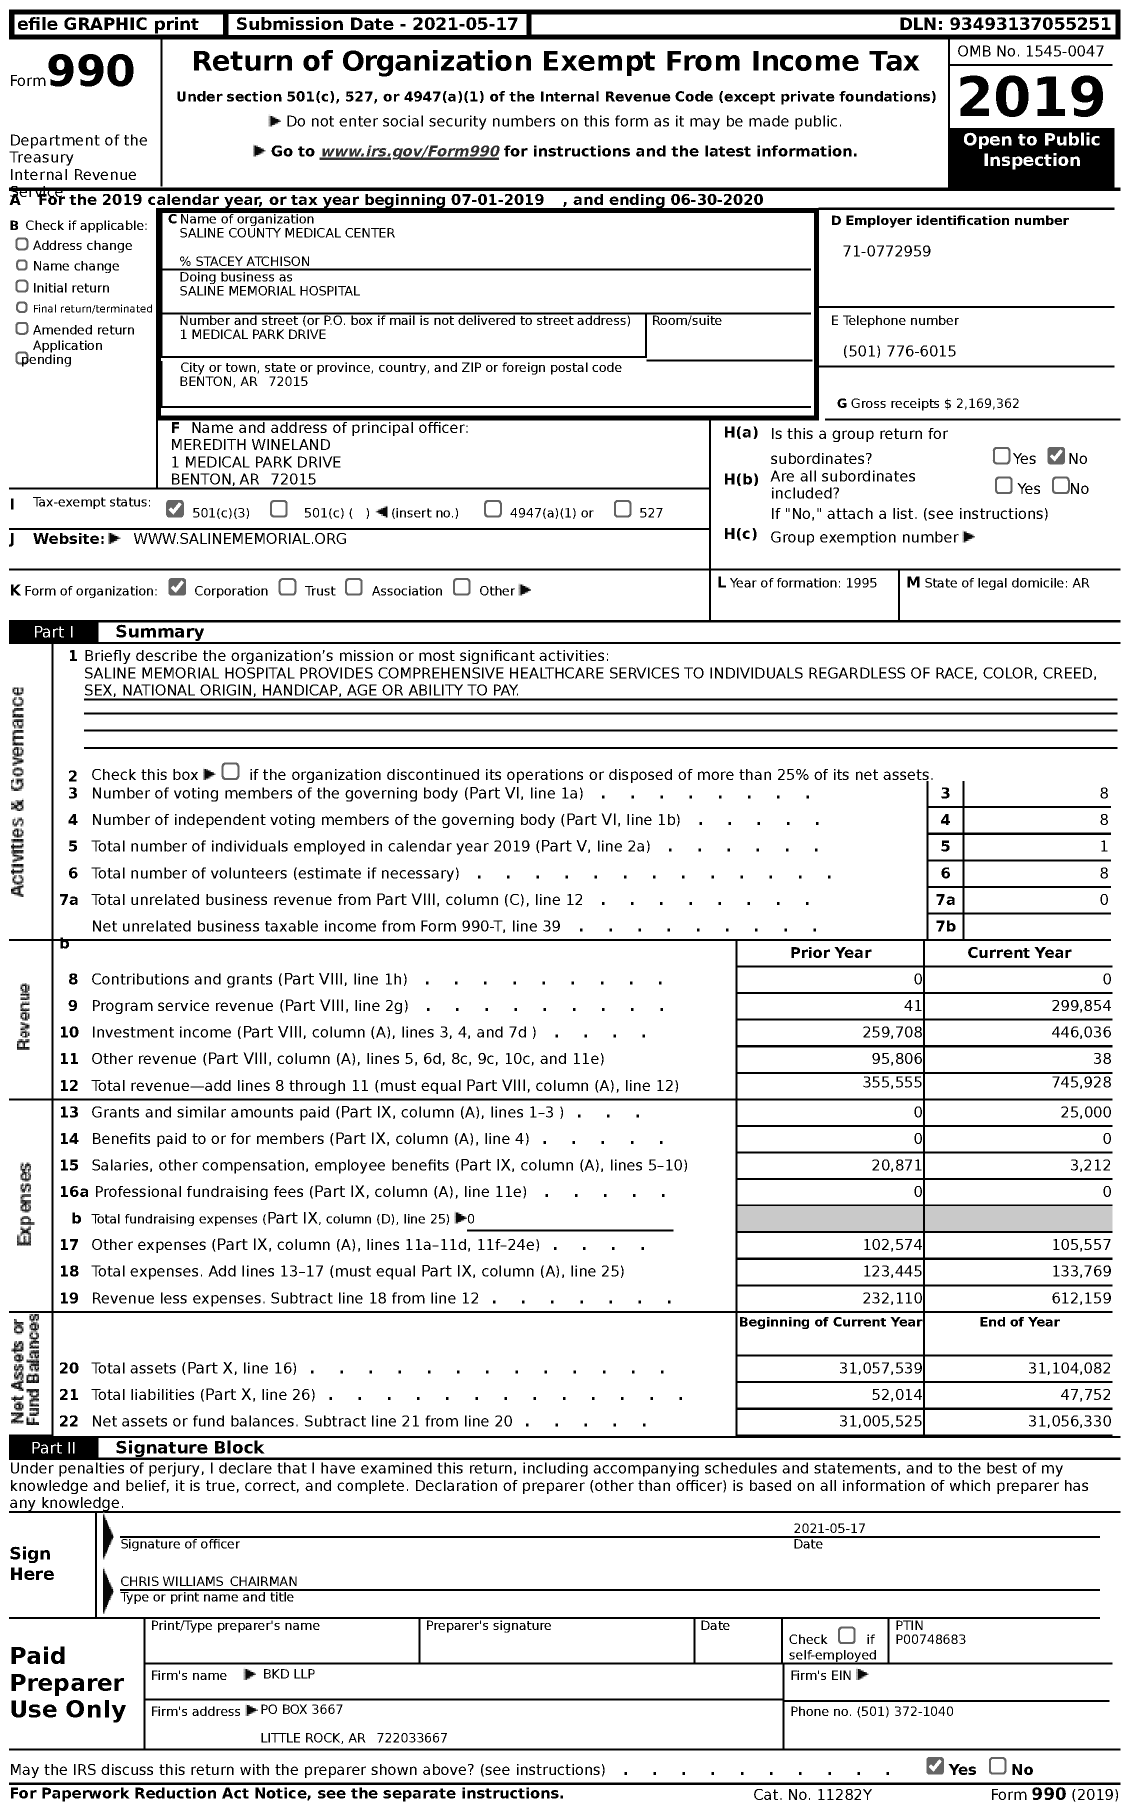 Image of first page of 2019 Form 990 for Saline Memorial Hospital (SMH)